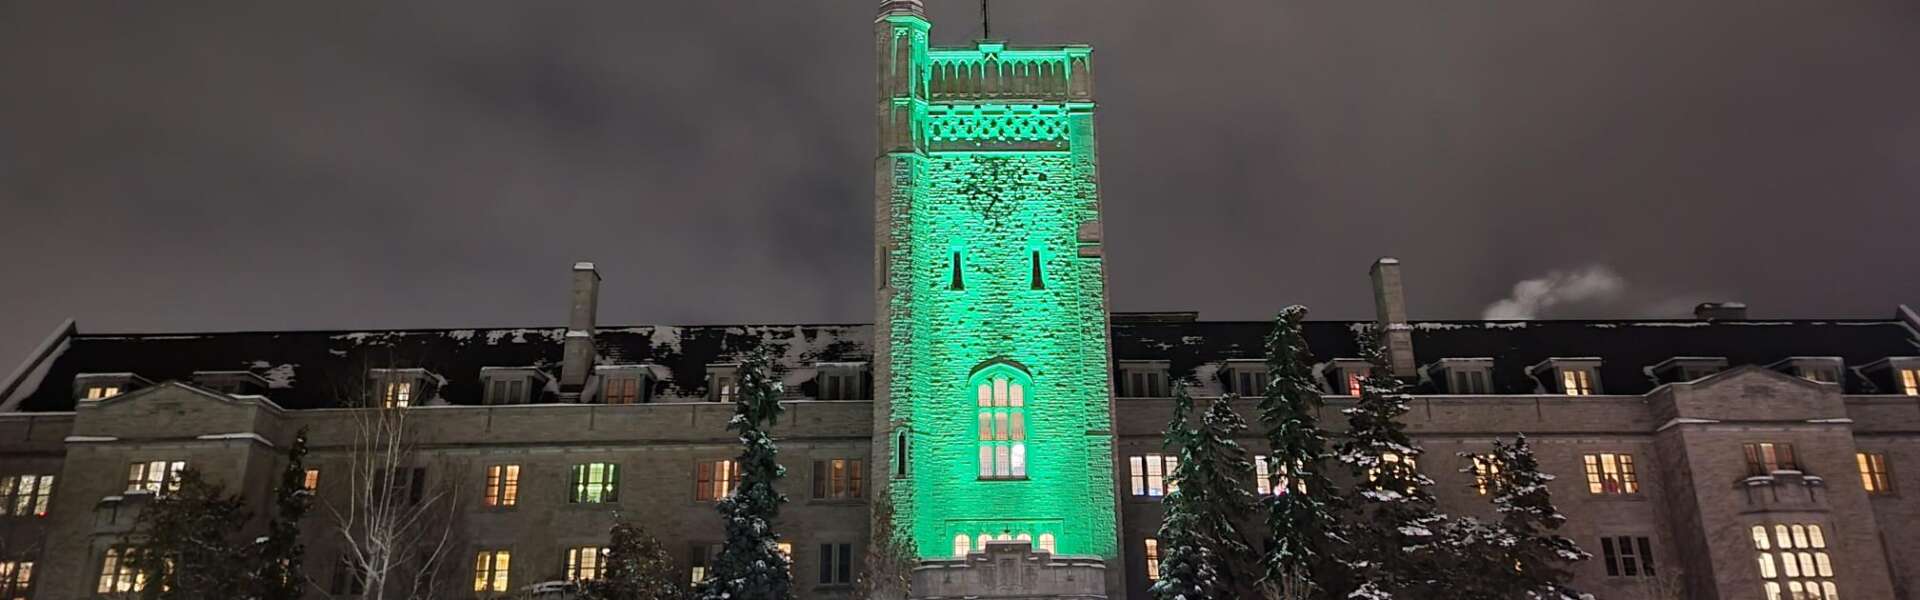 Johnston Hall at night in winter lit in green